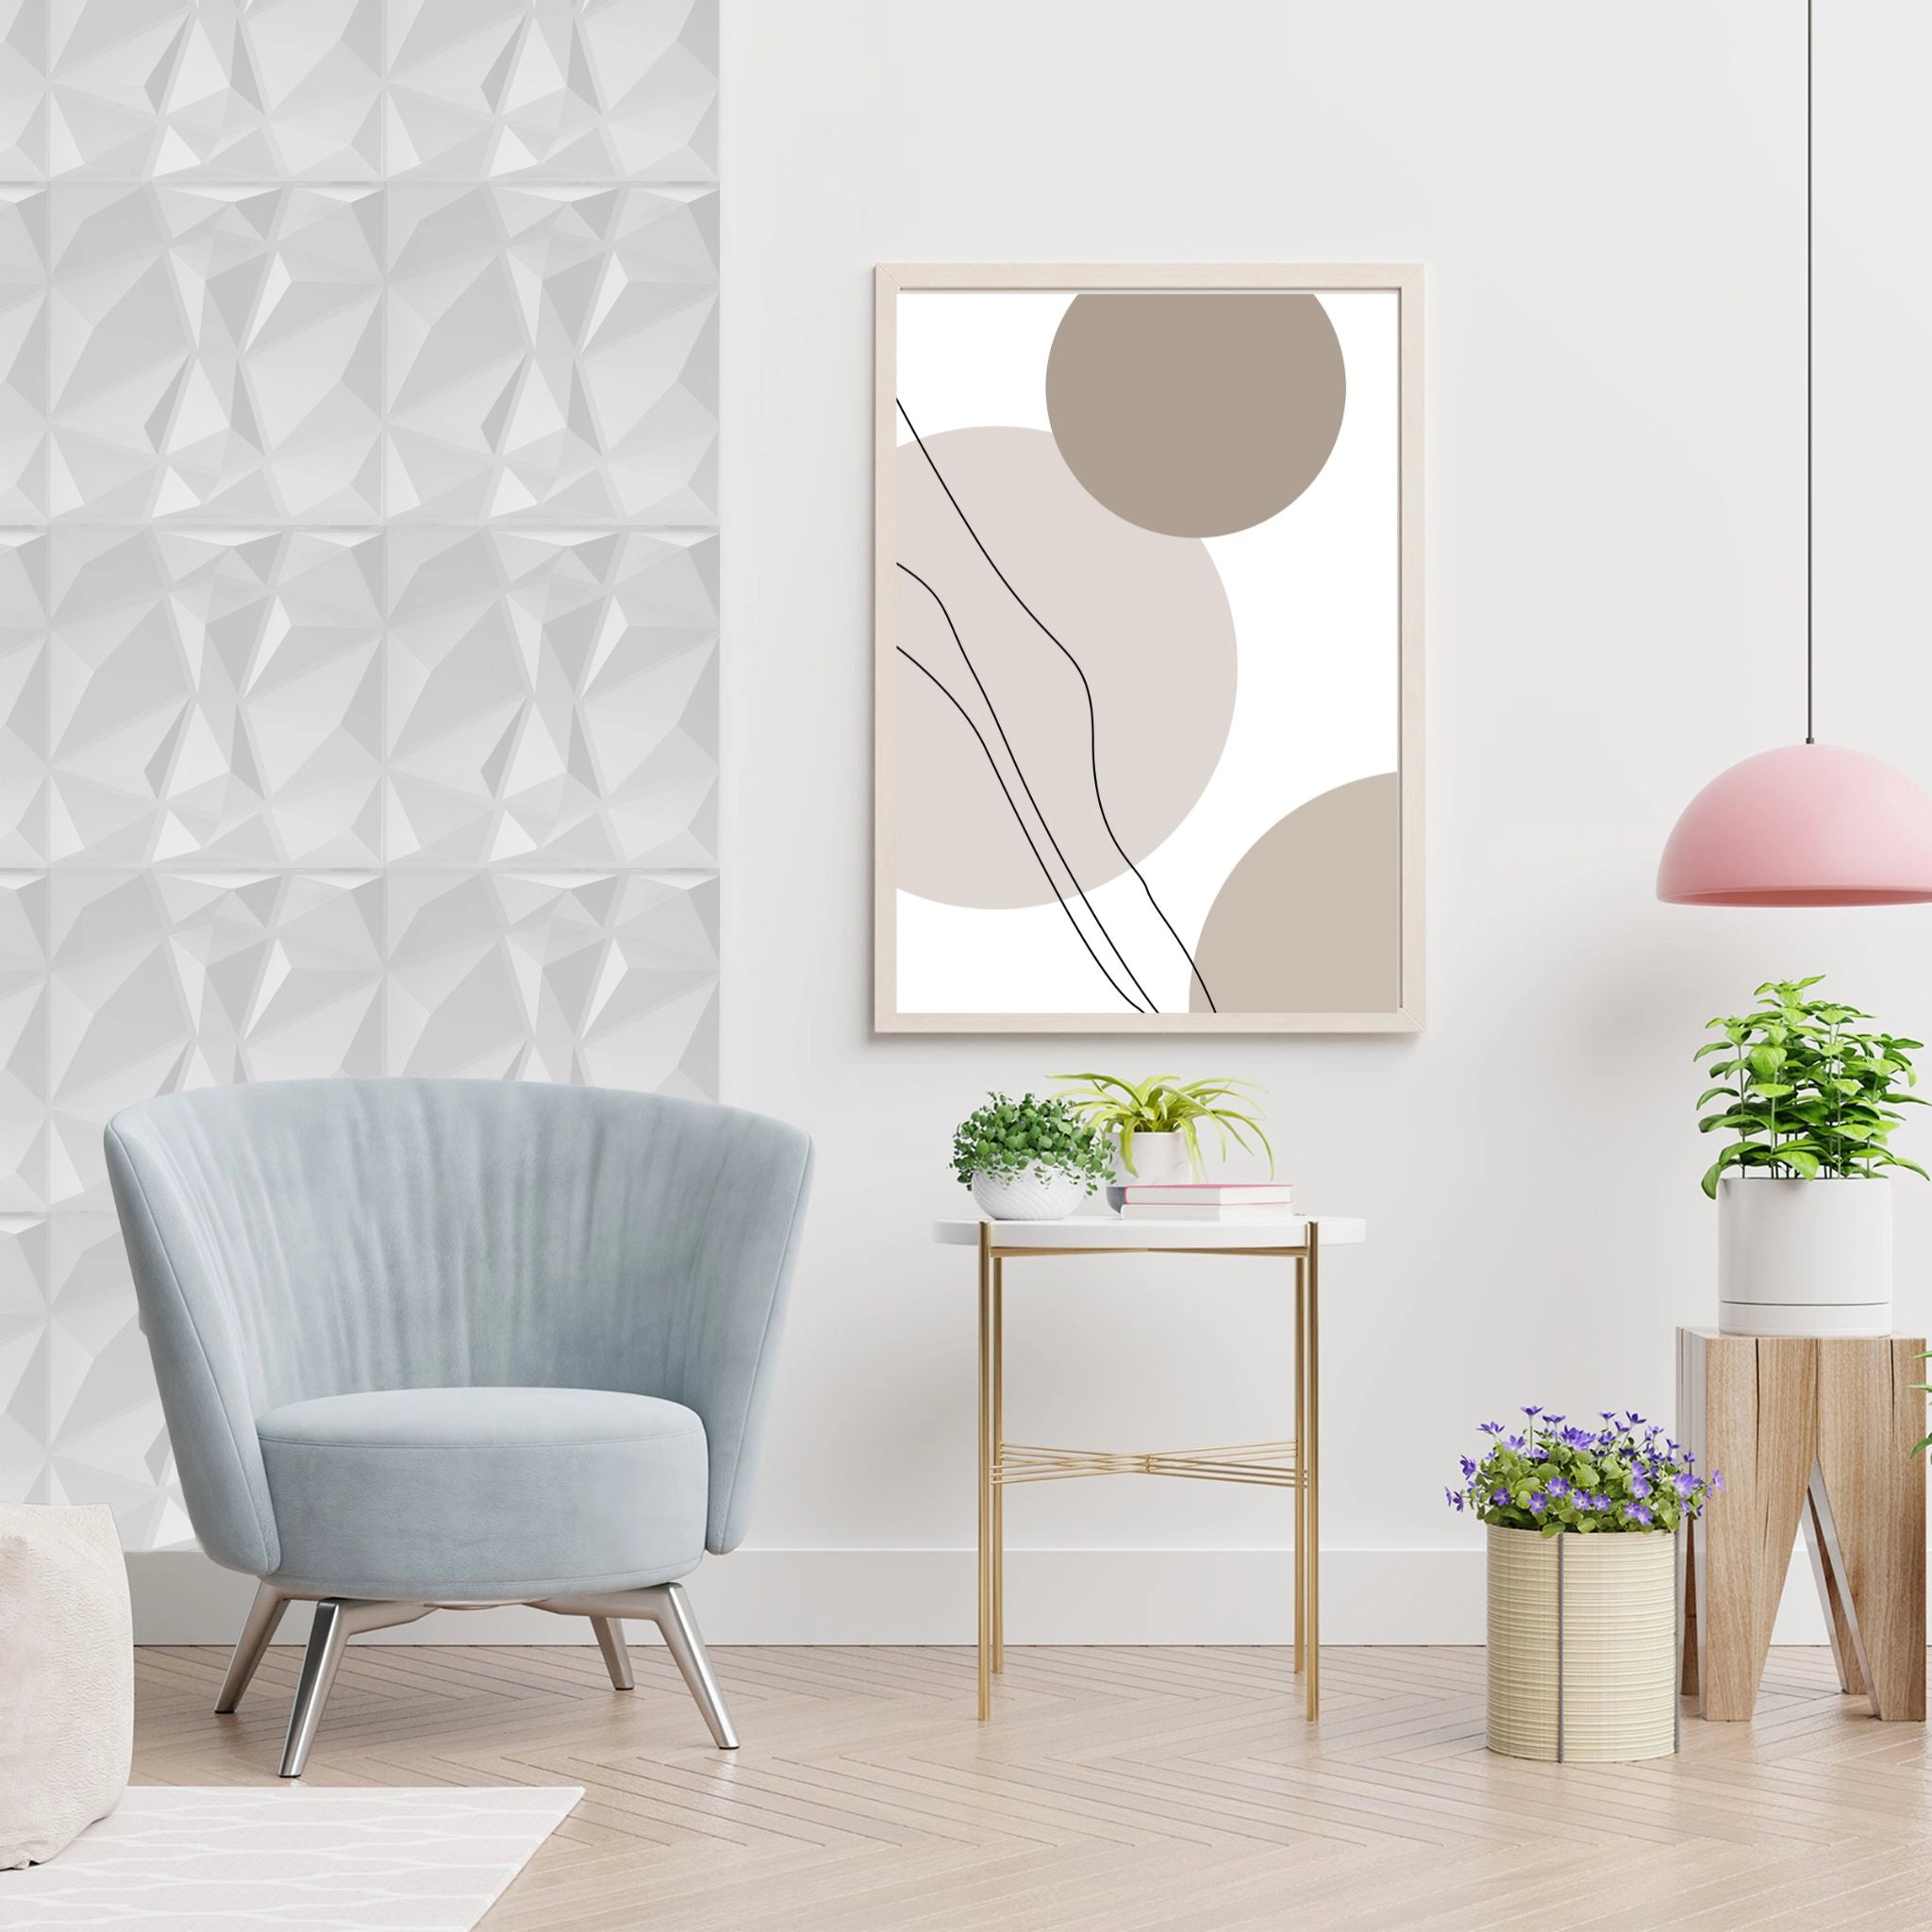 White PVC wall panel with geometric design in stylish living room